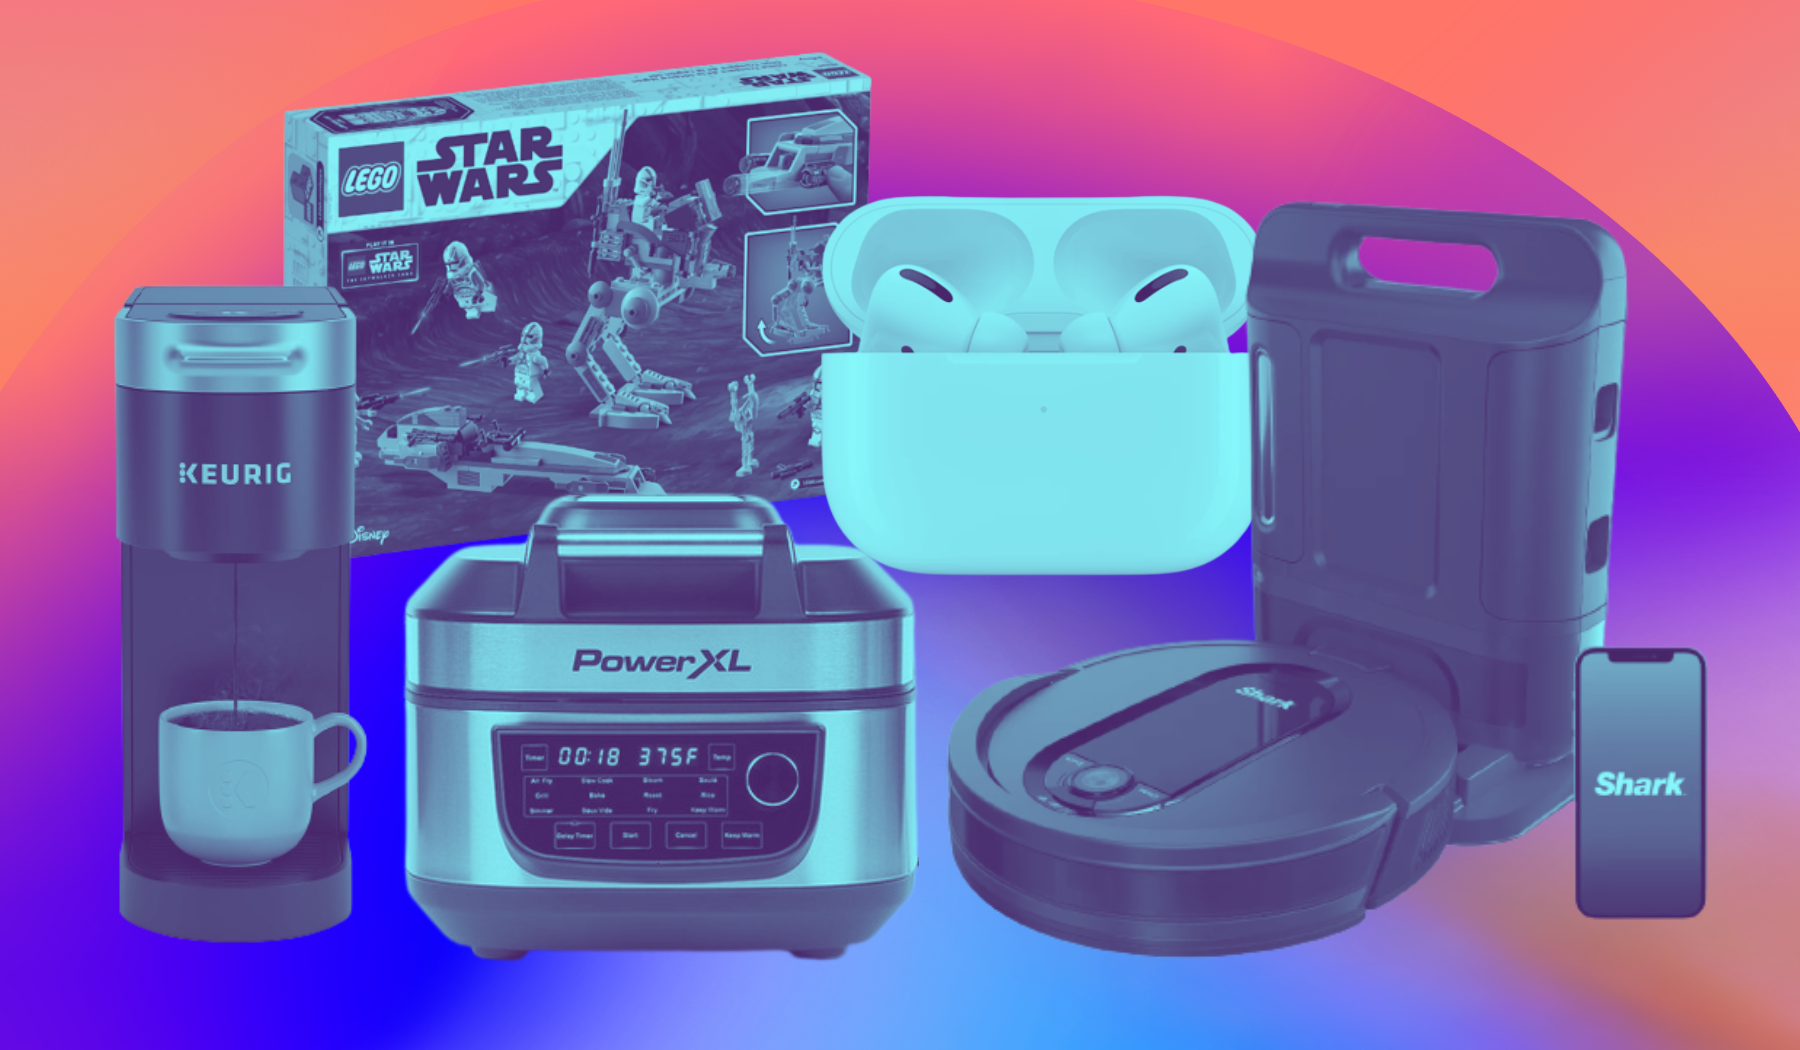 Coffee maker, Lego box, air fryer, AirPods, and robot vacuum on colorful graphic